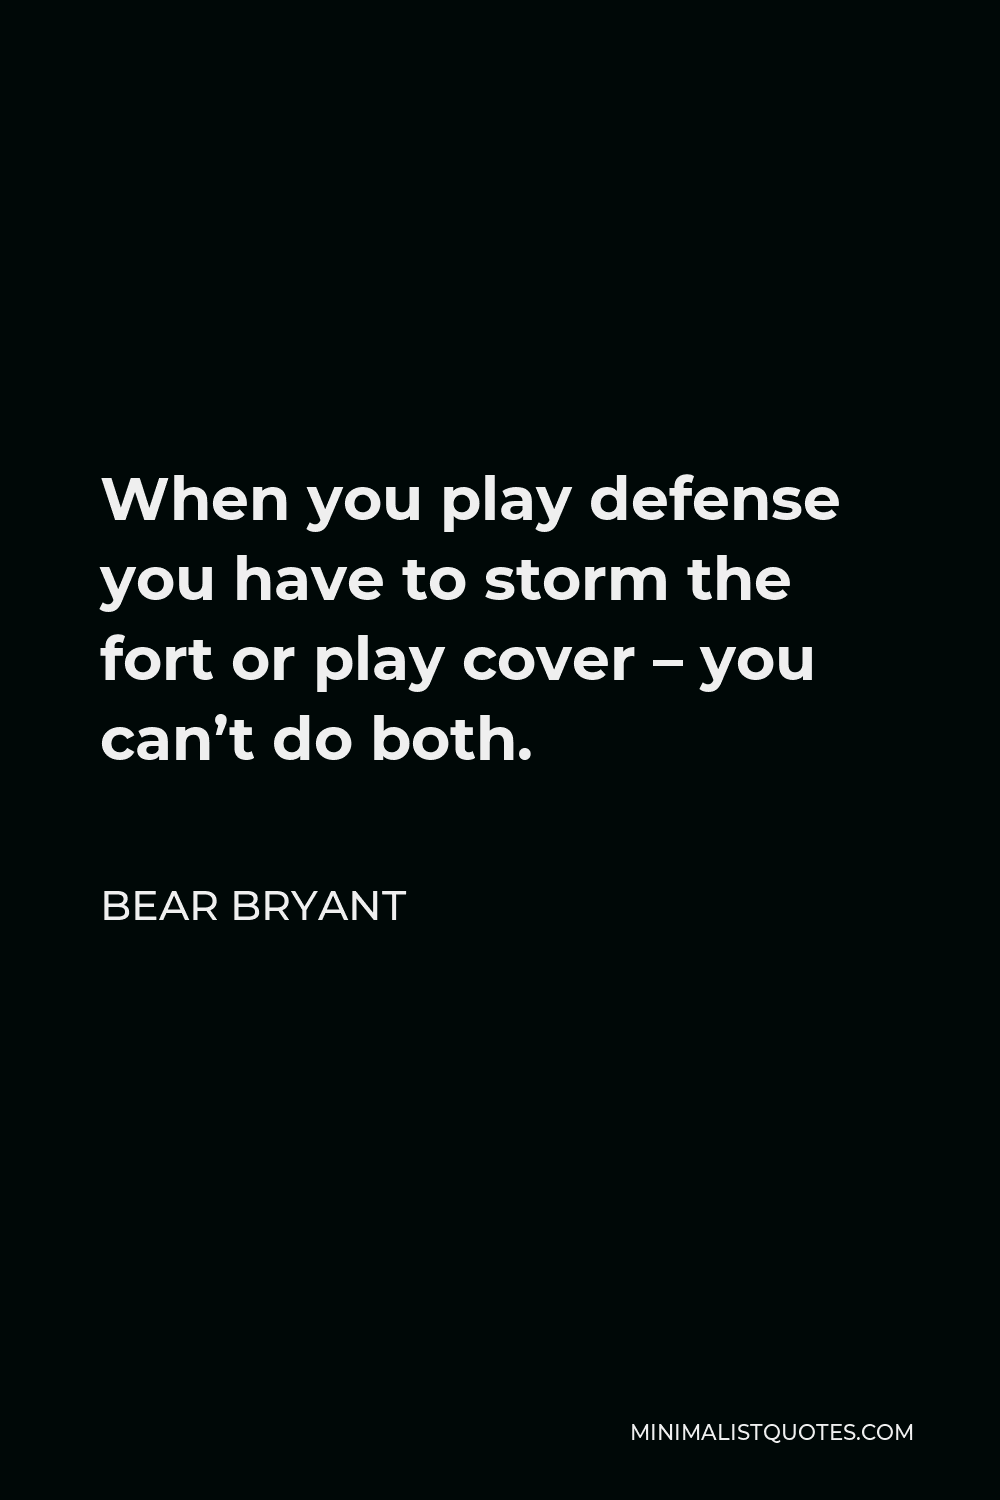 Bear Bryant Quote - When you play defense you have to storm the fort or play cover – you can’t do both.